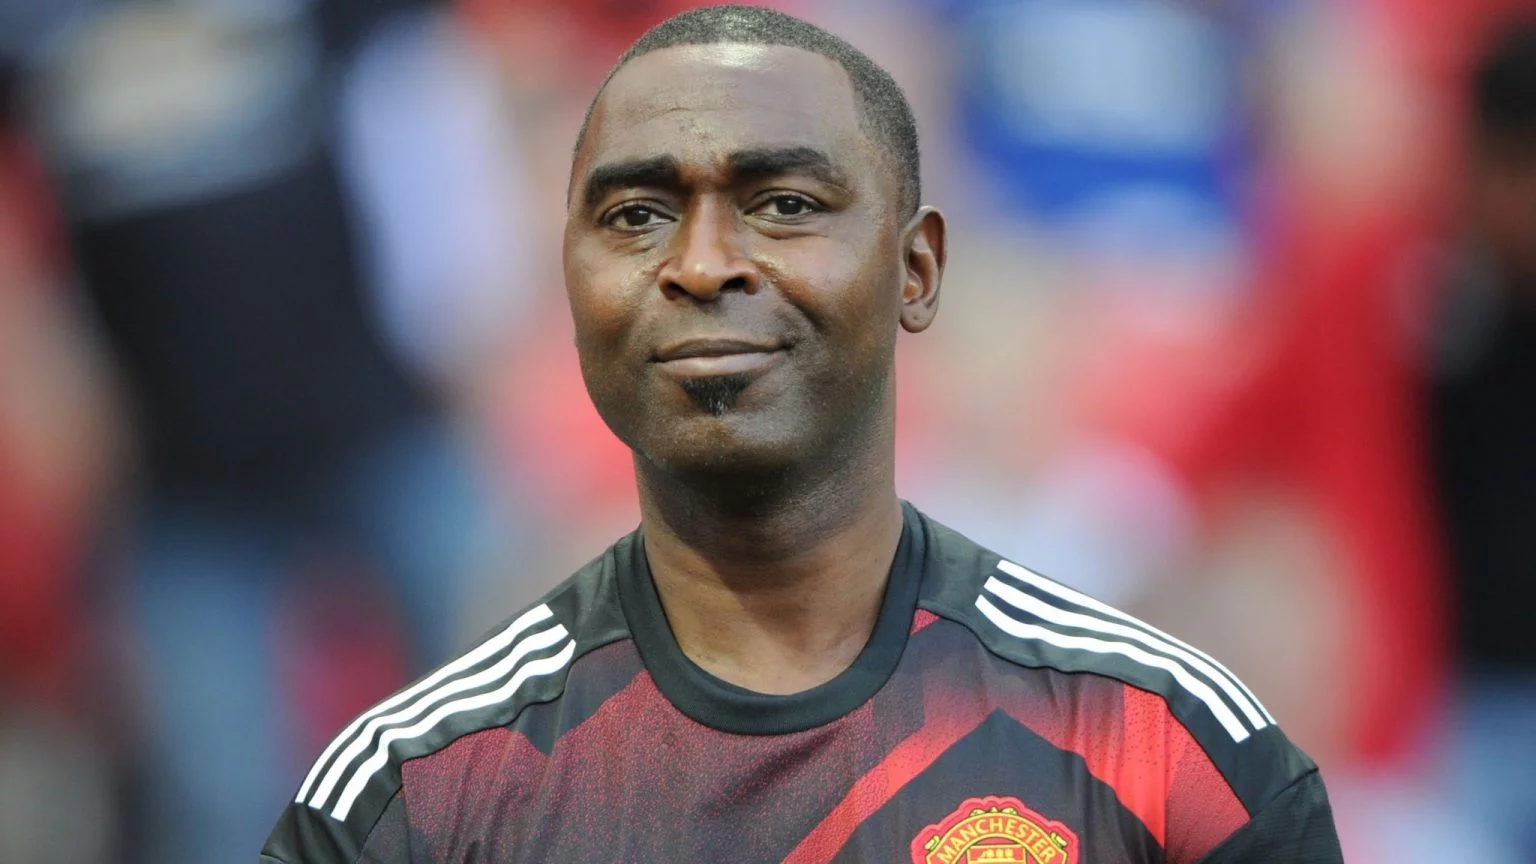 EPL: If I played with you, it’d drive me mad – Andy Cole slams Man Utd forward